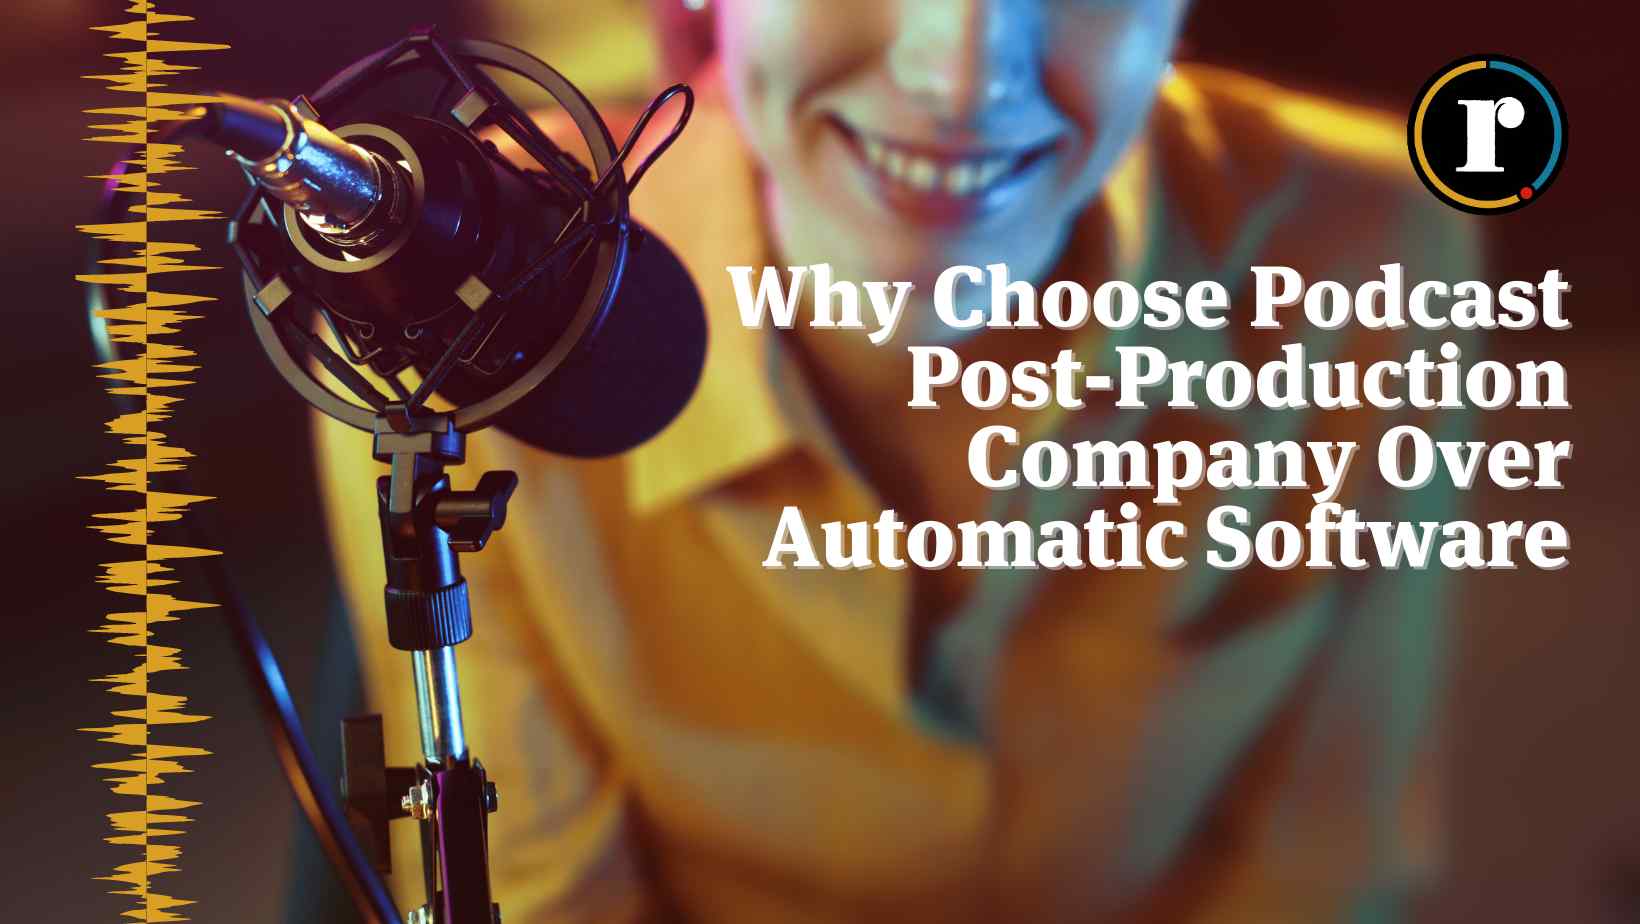 Why Choose A Podcast Post-Production Company Over Automatic Software?